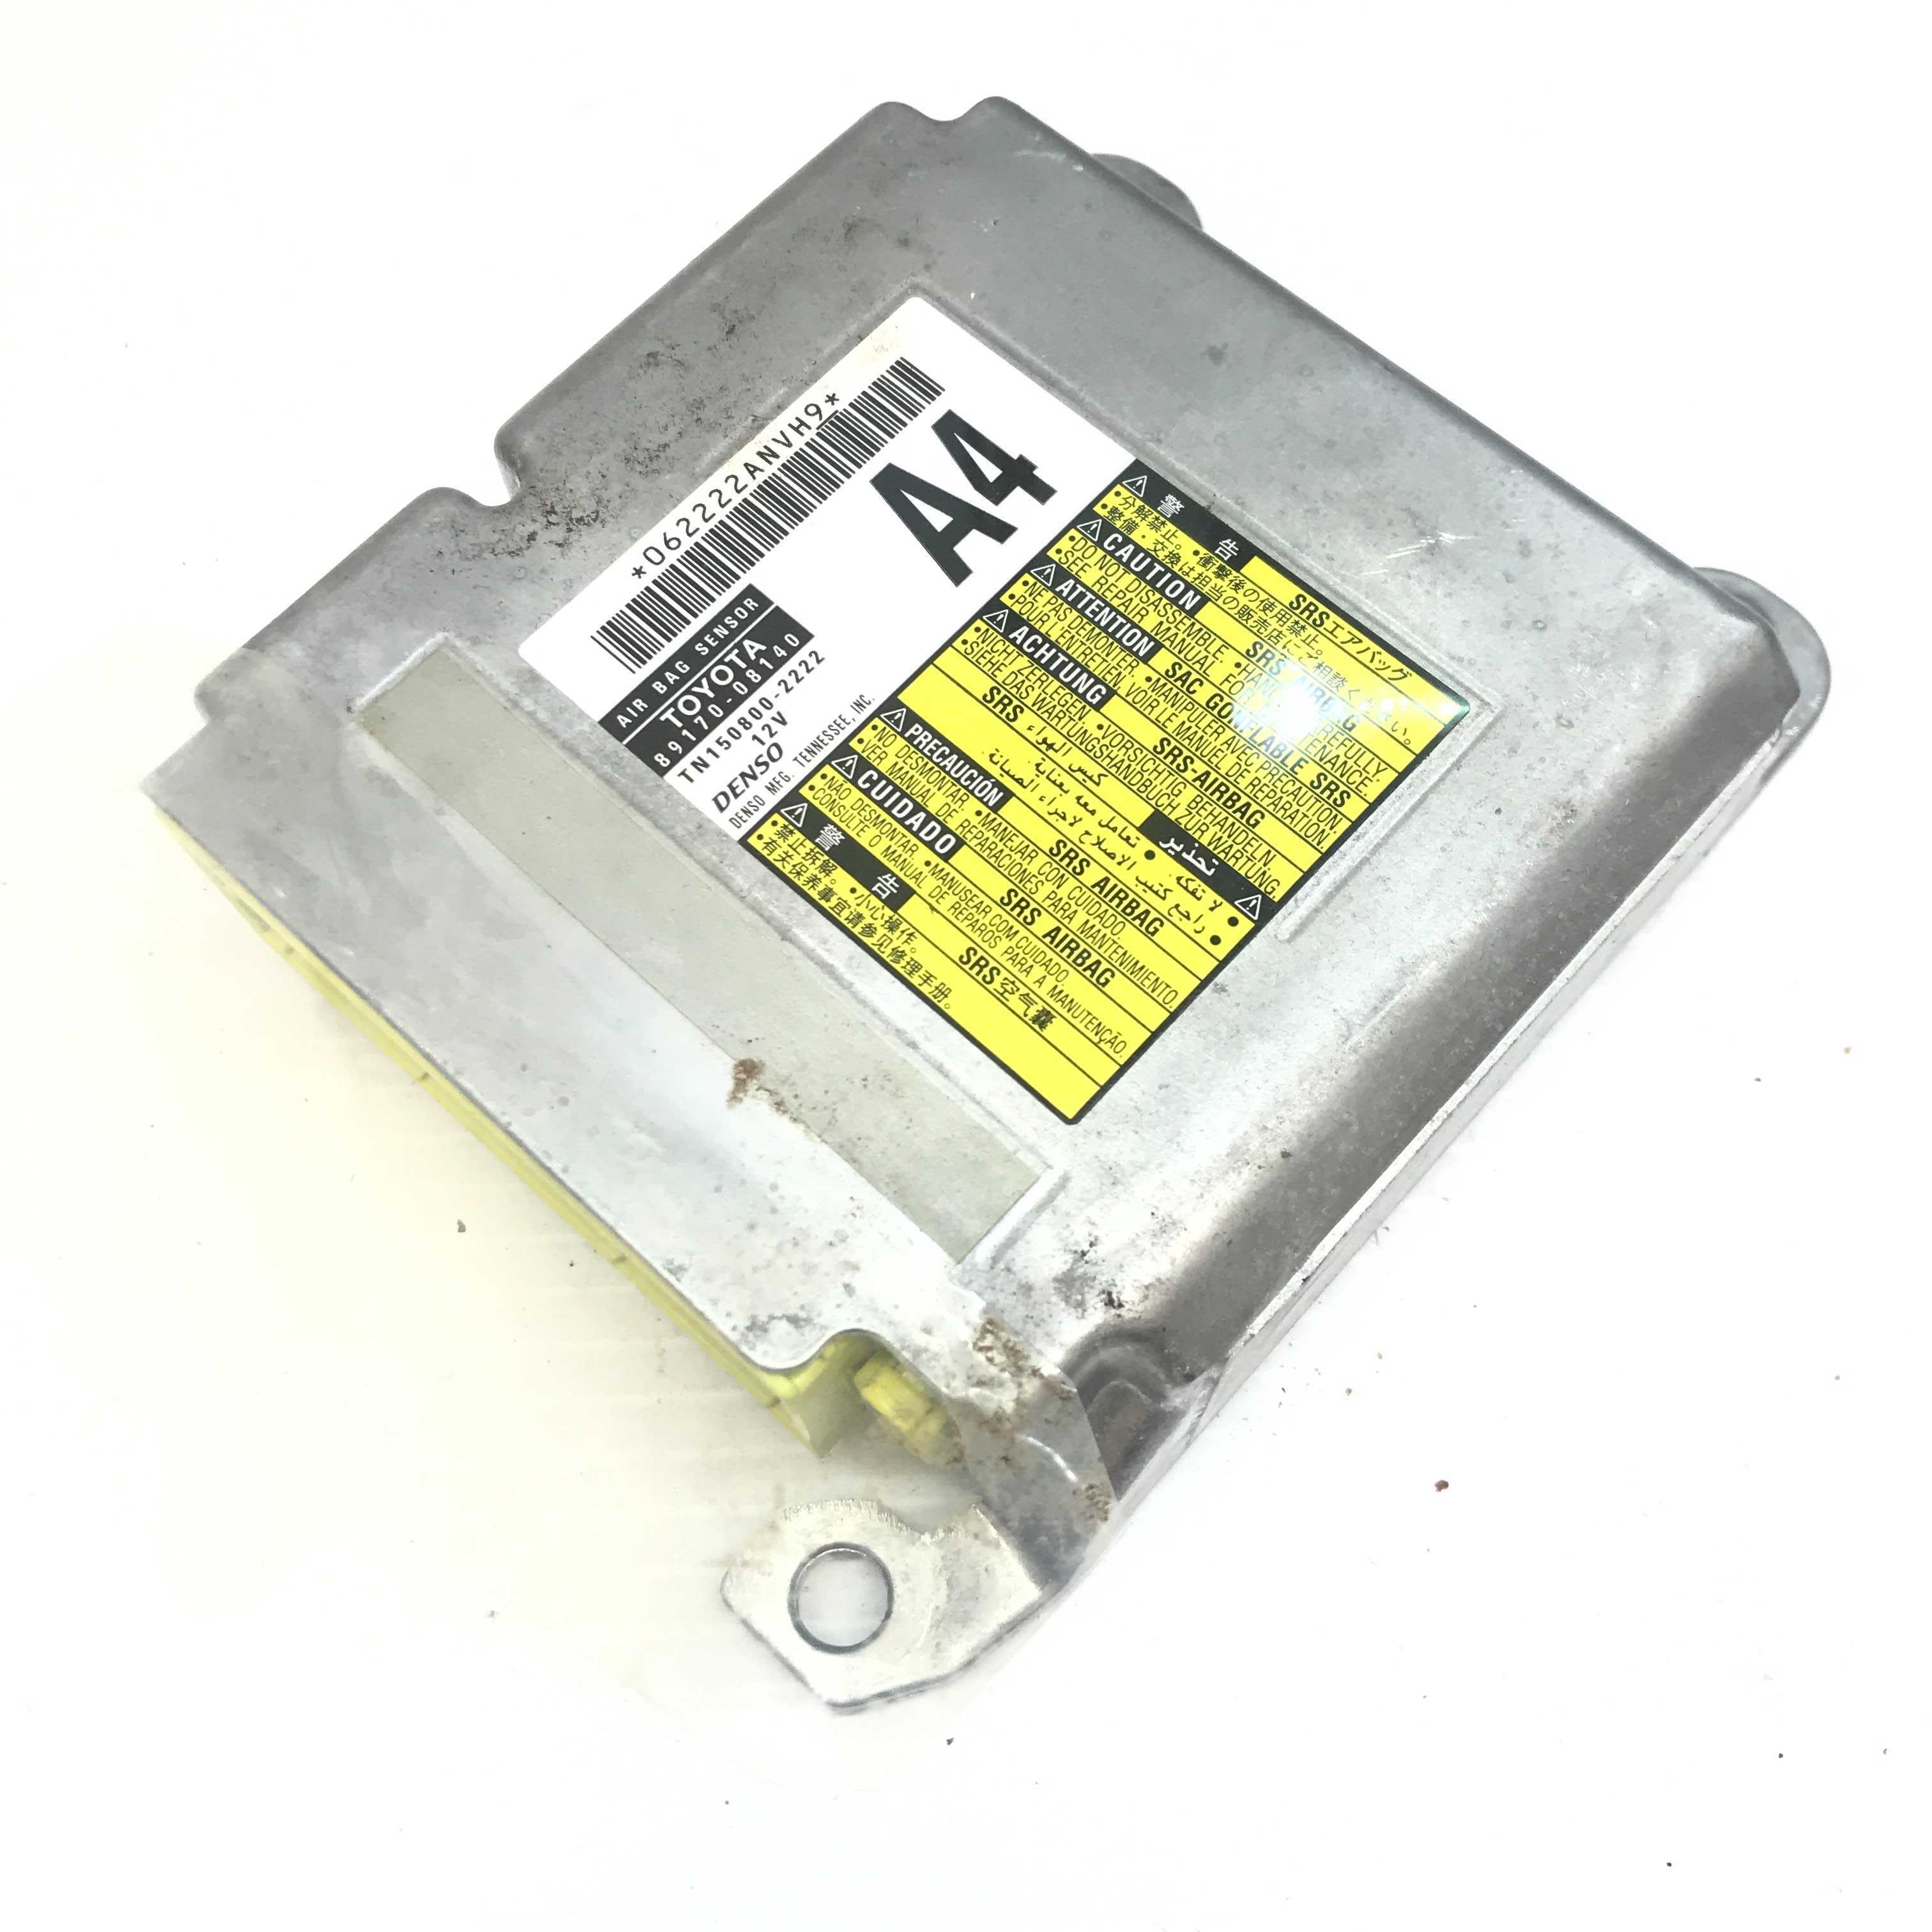 TOYOTA SIENNA SRS Airbag Computer Diagnostic Control Module PART #8917008140